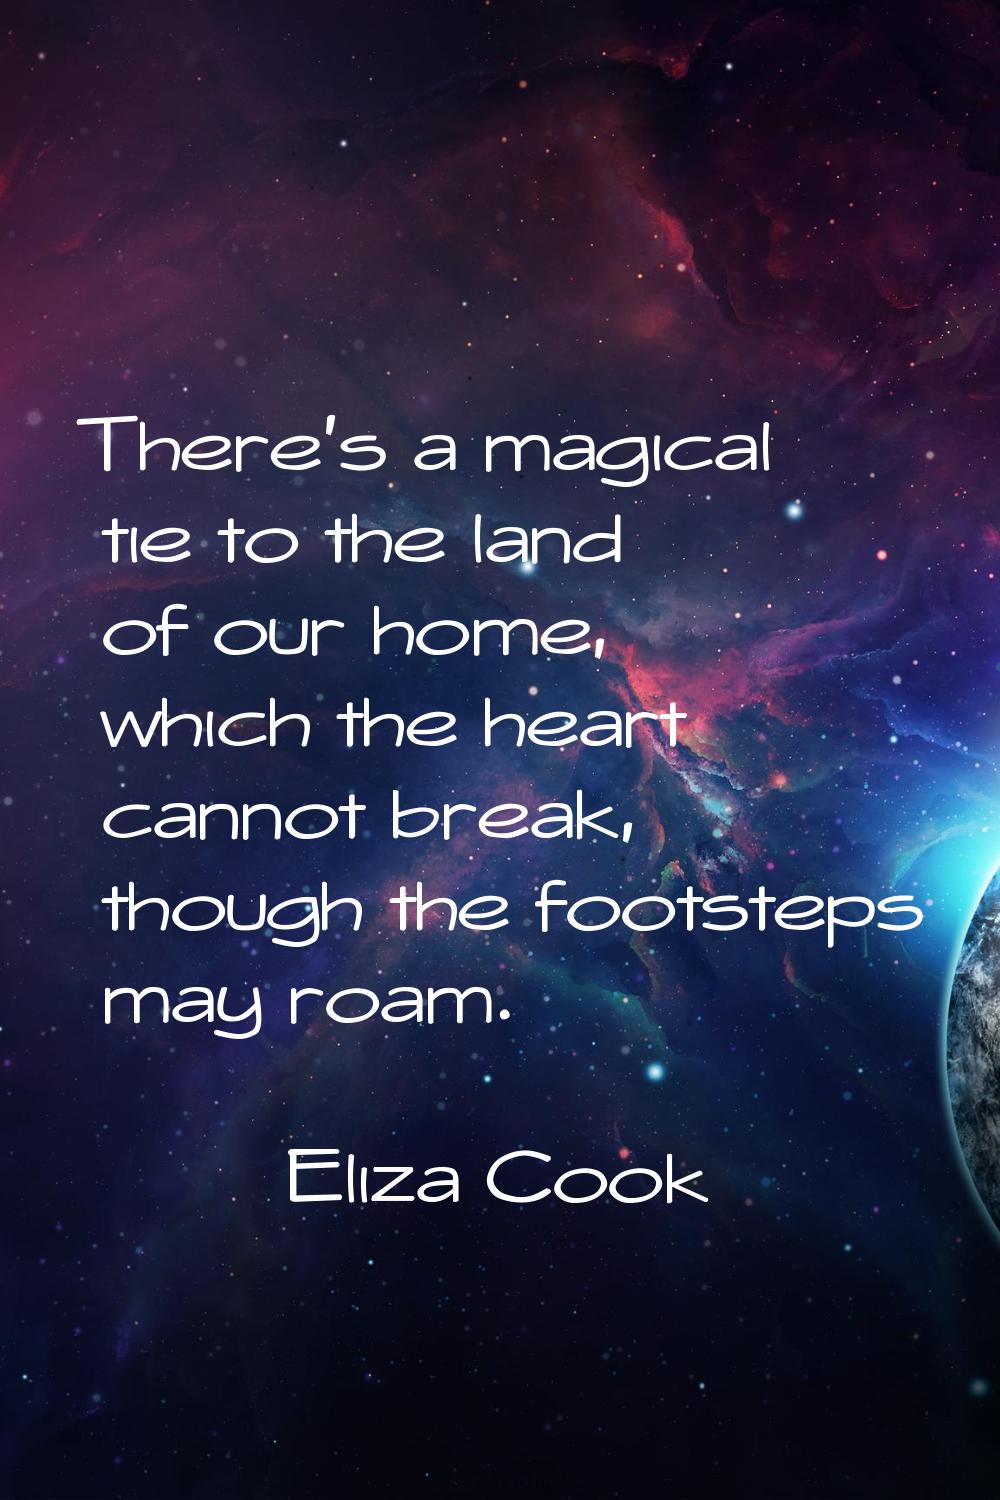 There's a magical tie to the land of our home, which the heart cannot break, though the footsteps m